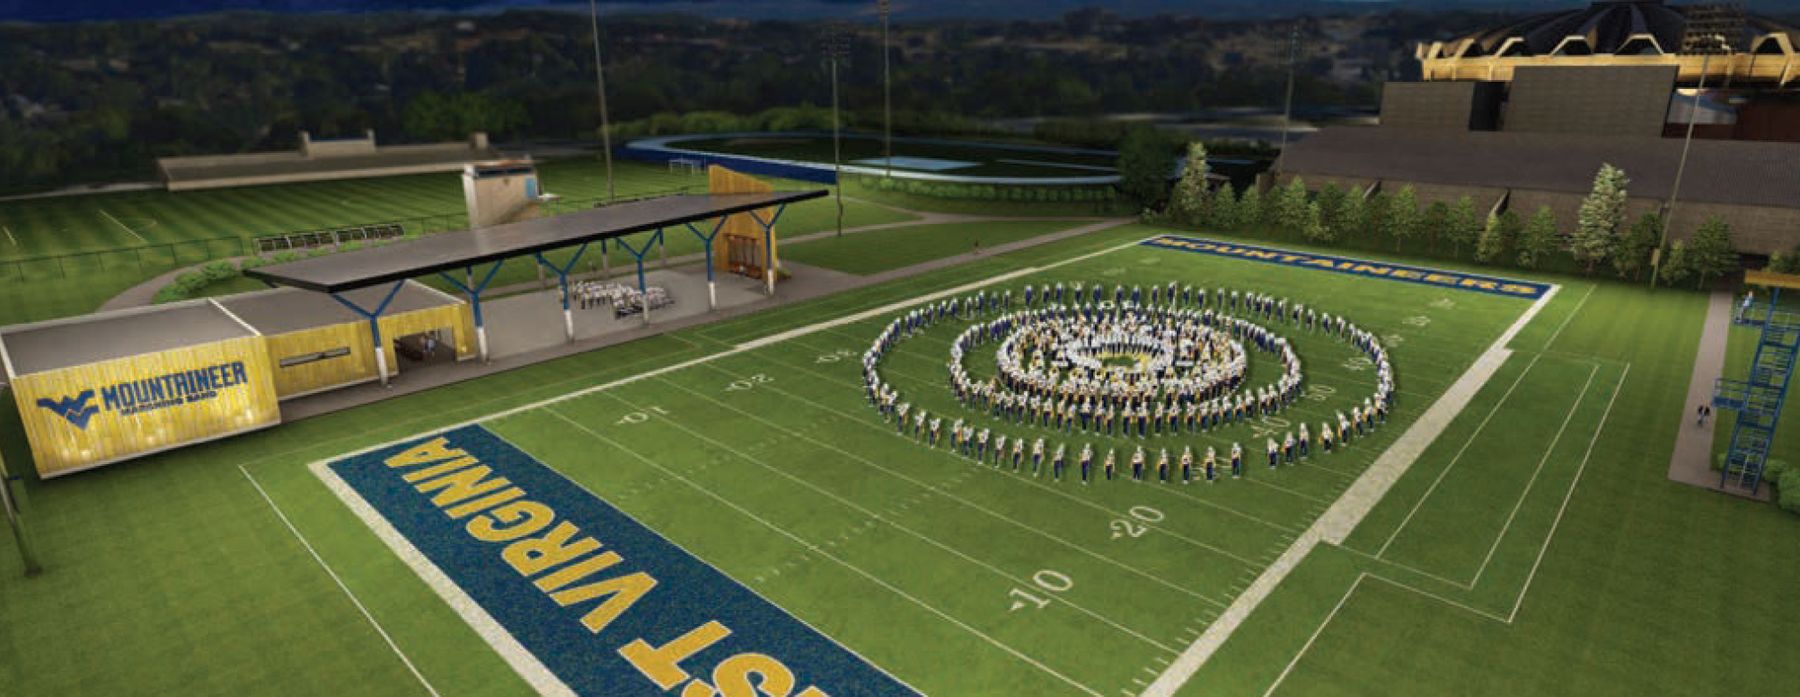 rendering of facility field